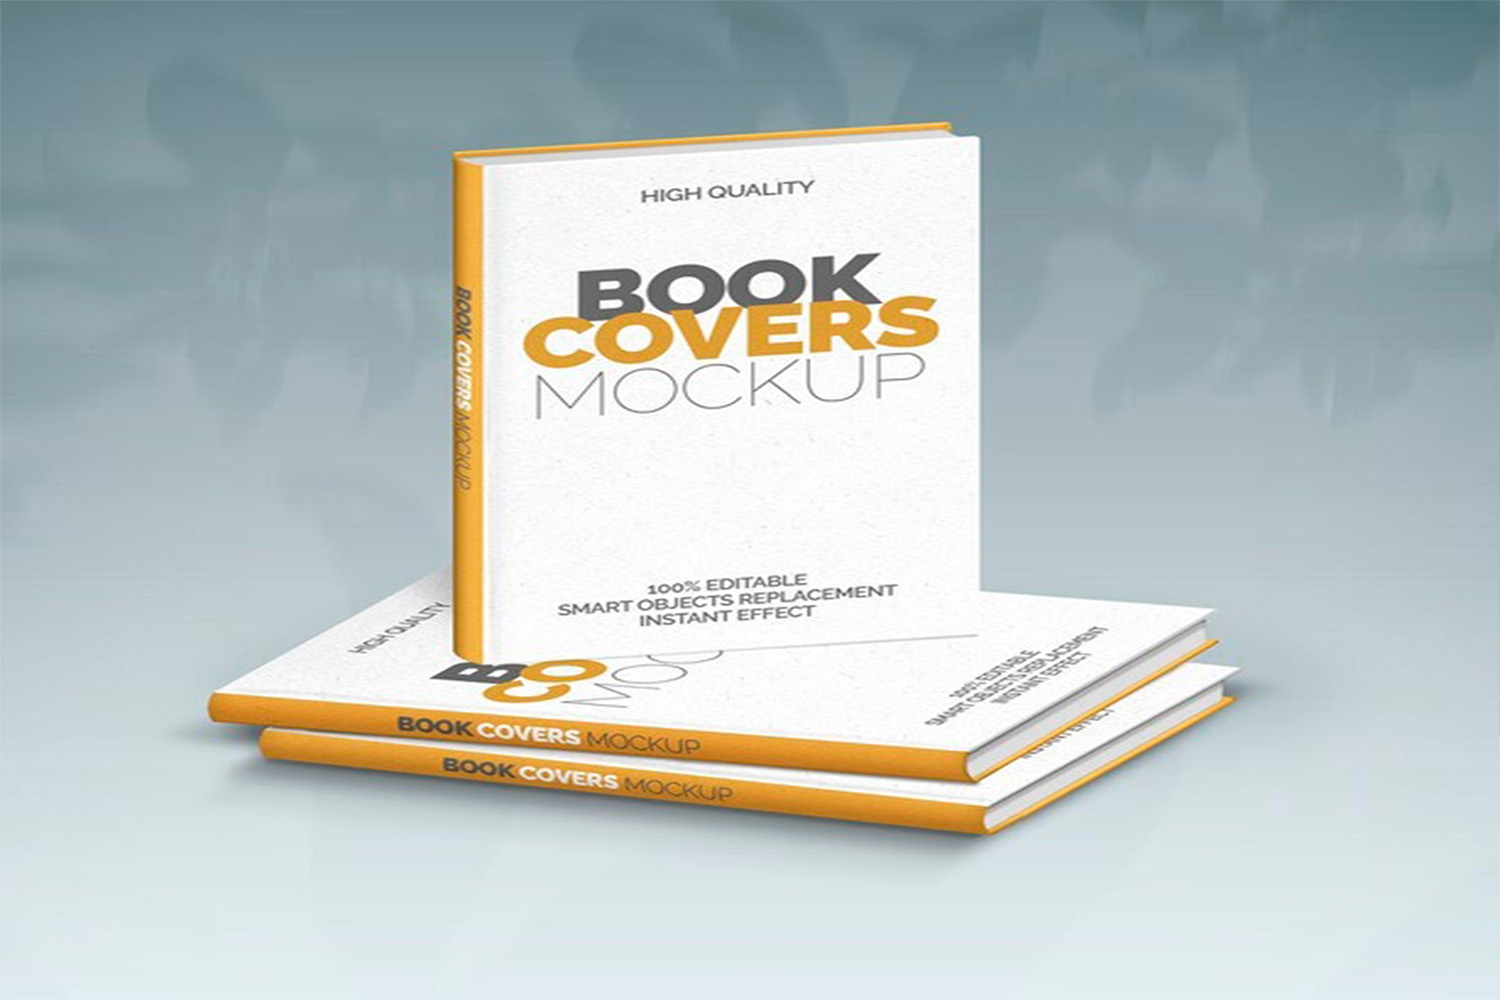 Three book covers mockup Free Download